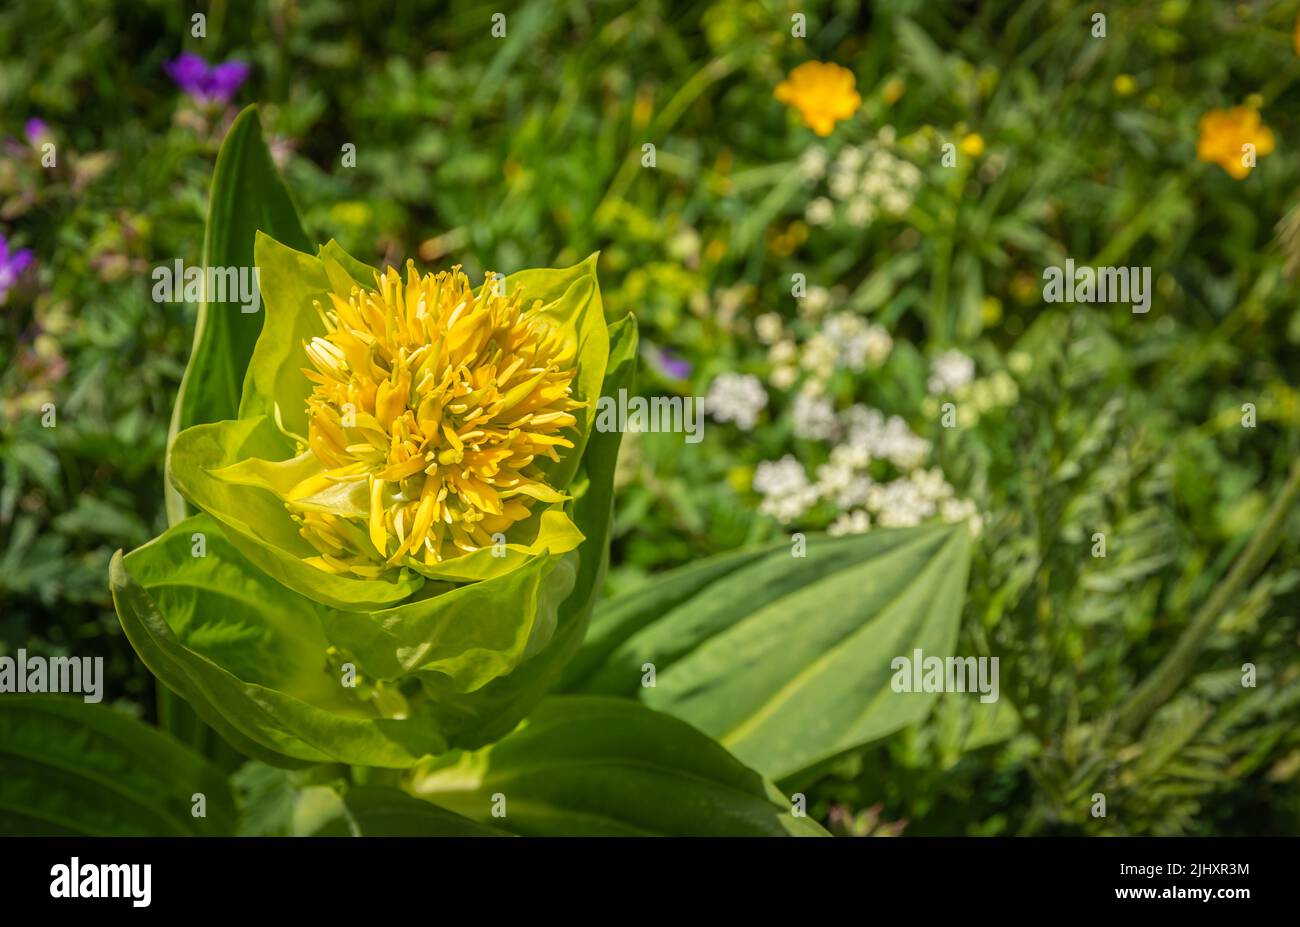 Gentiana lutea.( Mountain flower. The Dolomites. Italian Alps. Europe. It grows in grassy alpine and sub-alpine pastures, usually on calcareous soils. Stock Photo